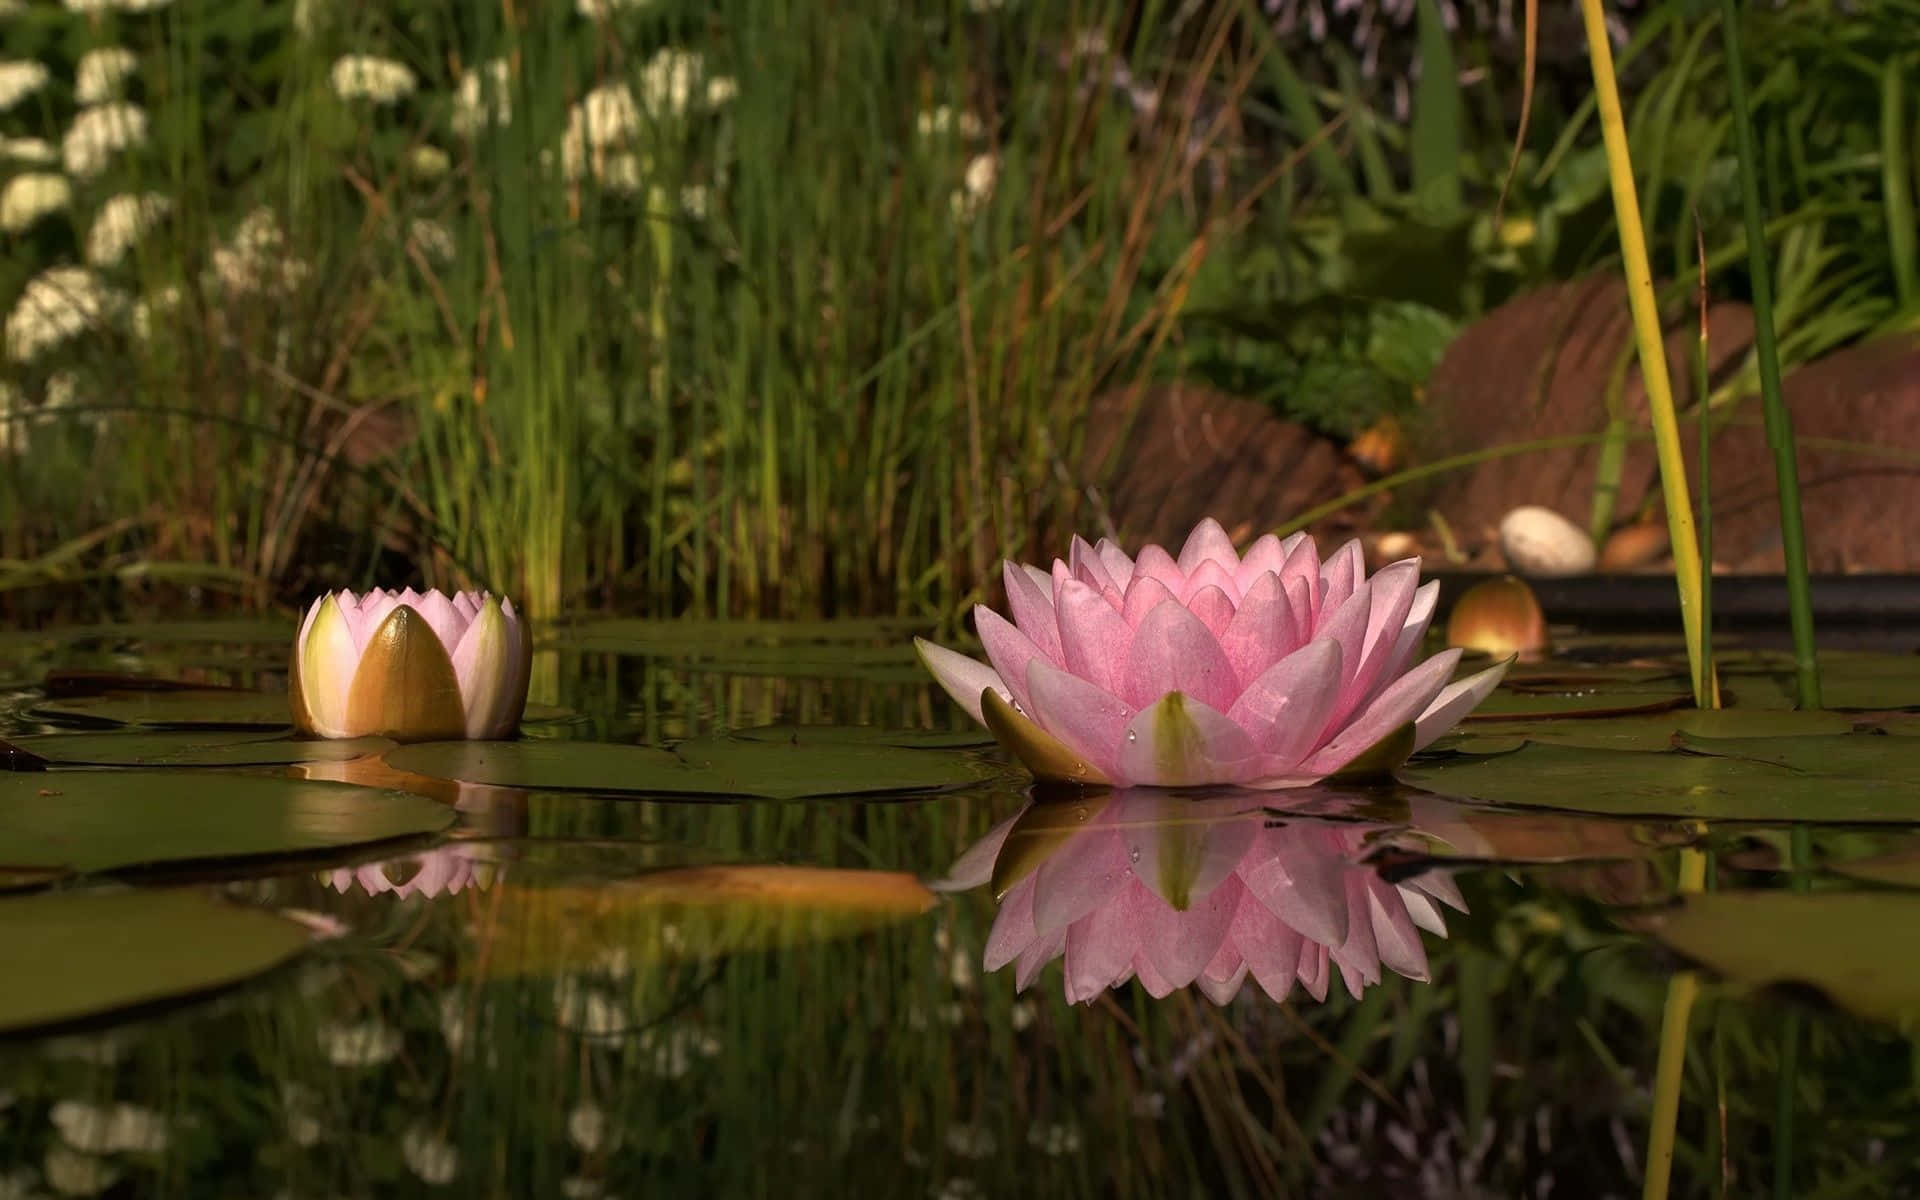 Reflections of a Lotus